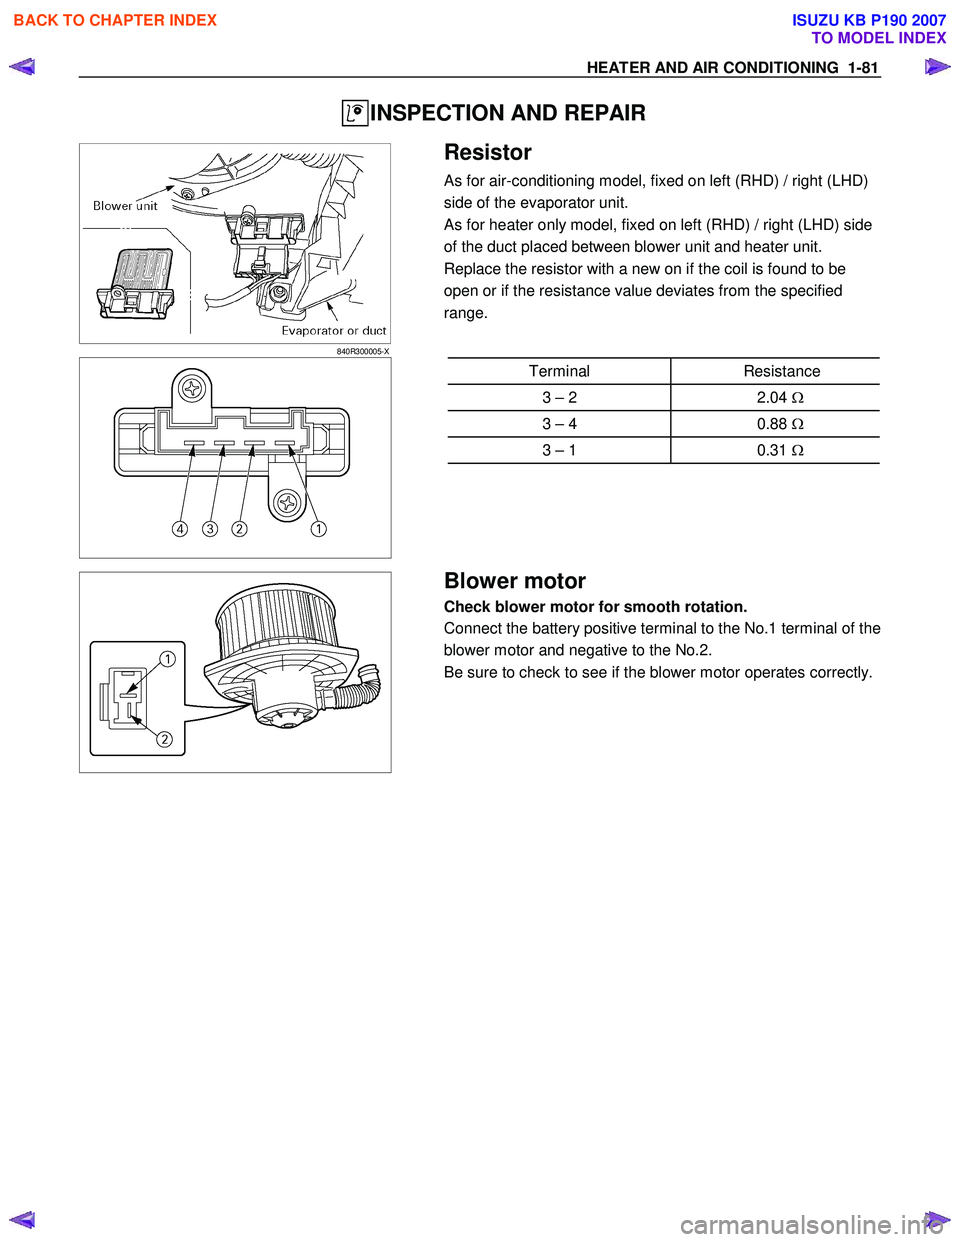 ISUZU KB P190 2007  Workshop Repair Manual HEATER AND AIR CONDITIONING  1-81 
 INSPECTION AND REPAIR 
   
 
 
840R300005-X 
  
 Resistor 
As for air-conditioning model, fixed on left (RHD) / right (LHD)  
side of the evaporator unit. 
As for h